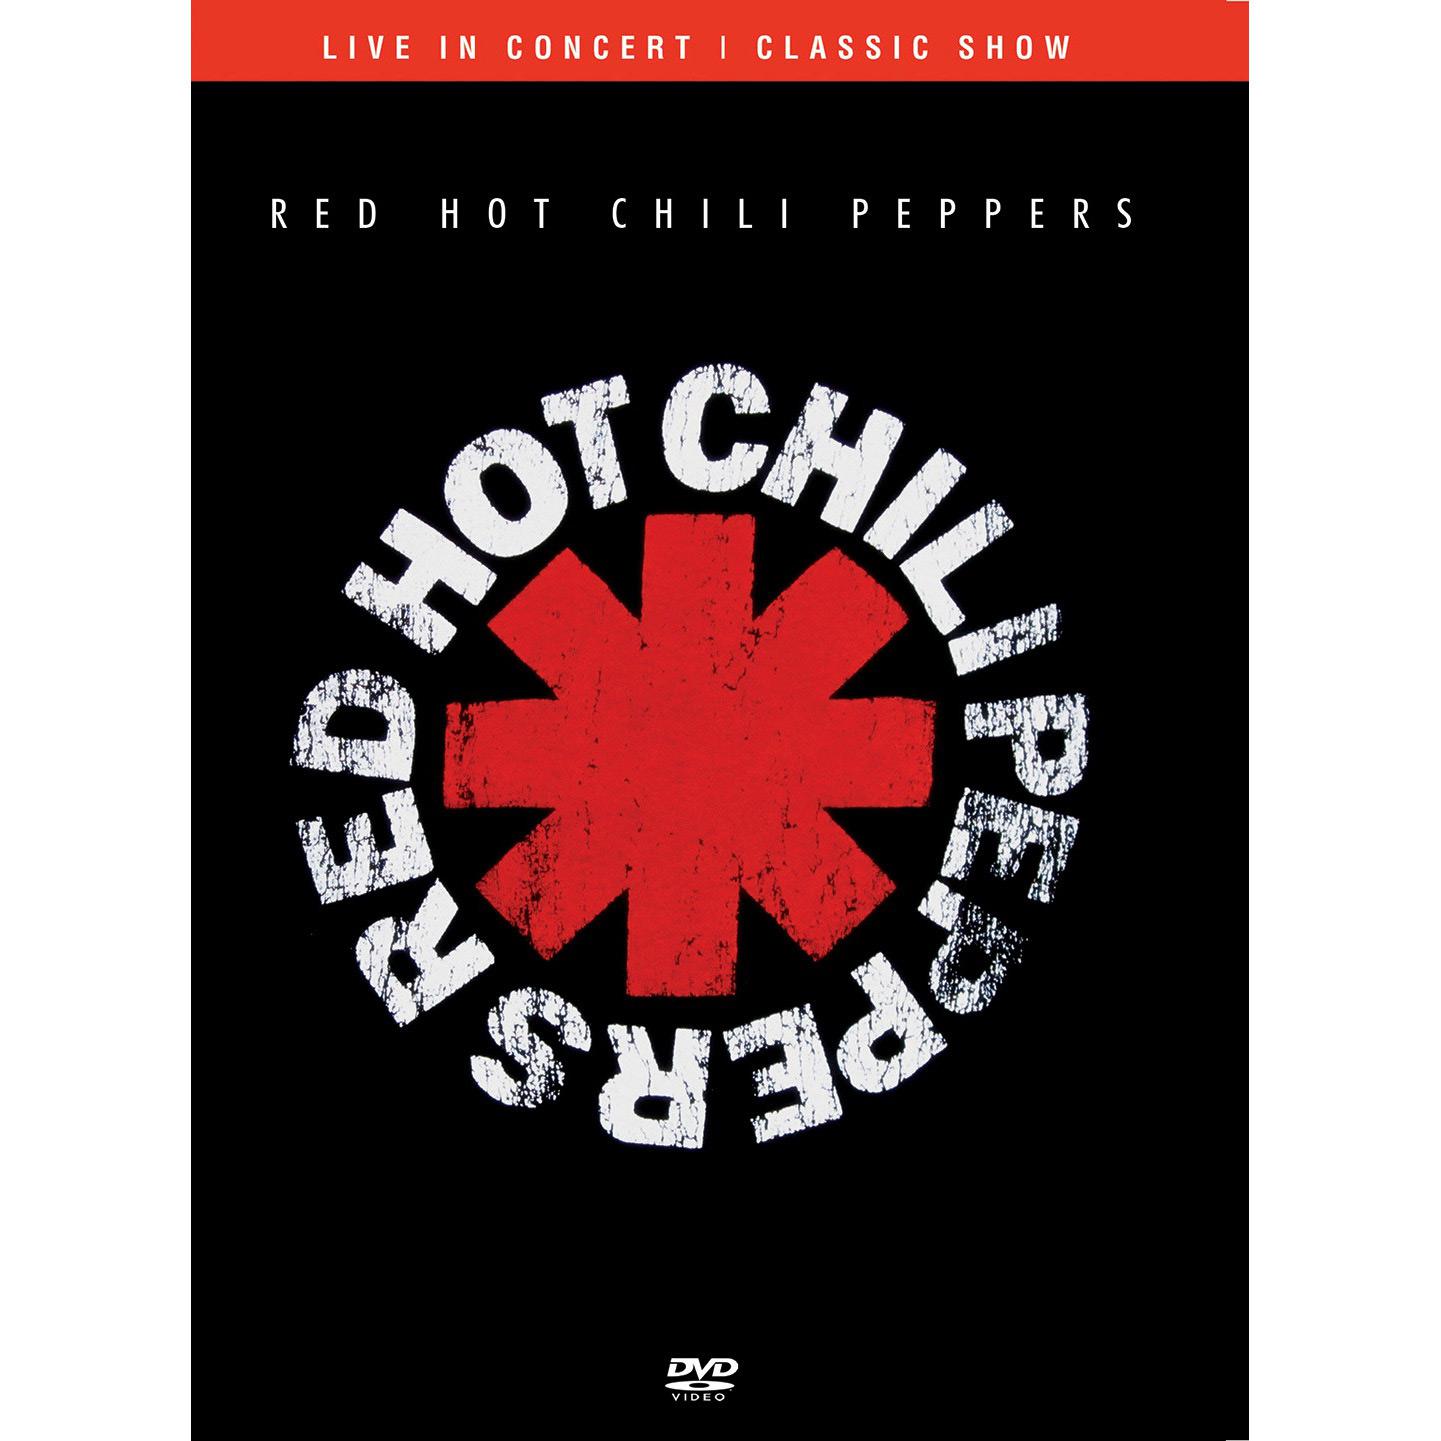 DVD - Red Hot Chilli Peppers - Live From The Reading Festival é bom? Vale a pena?